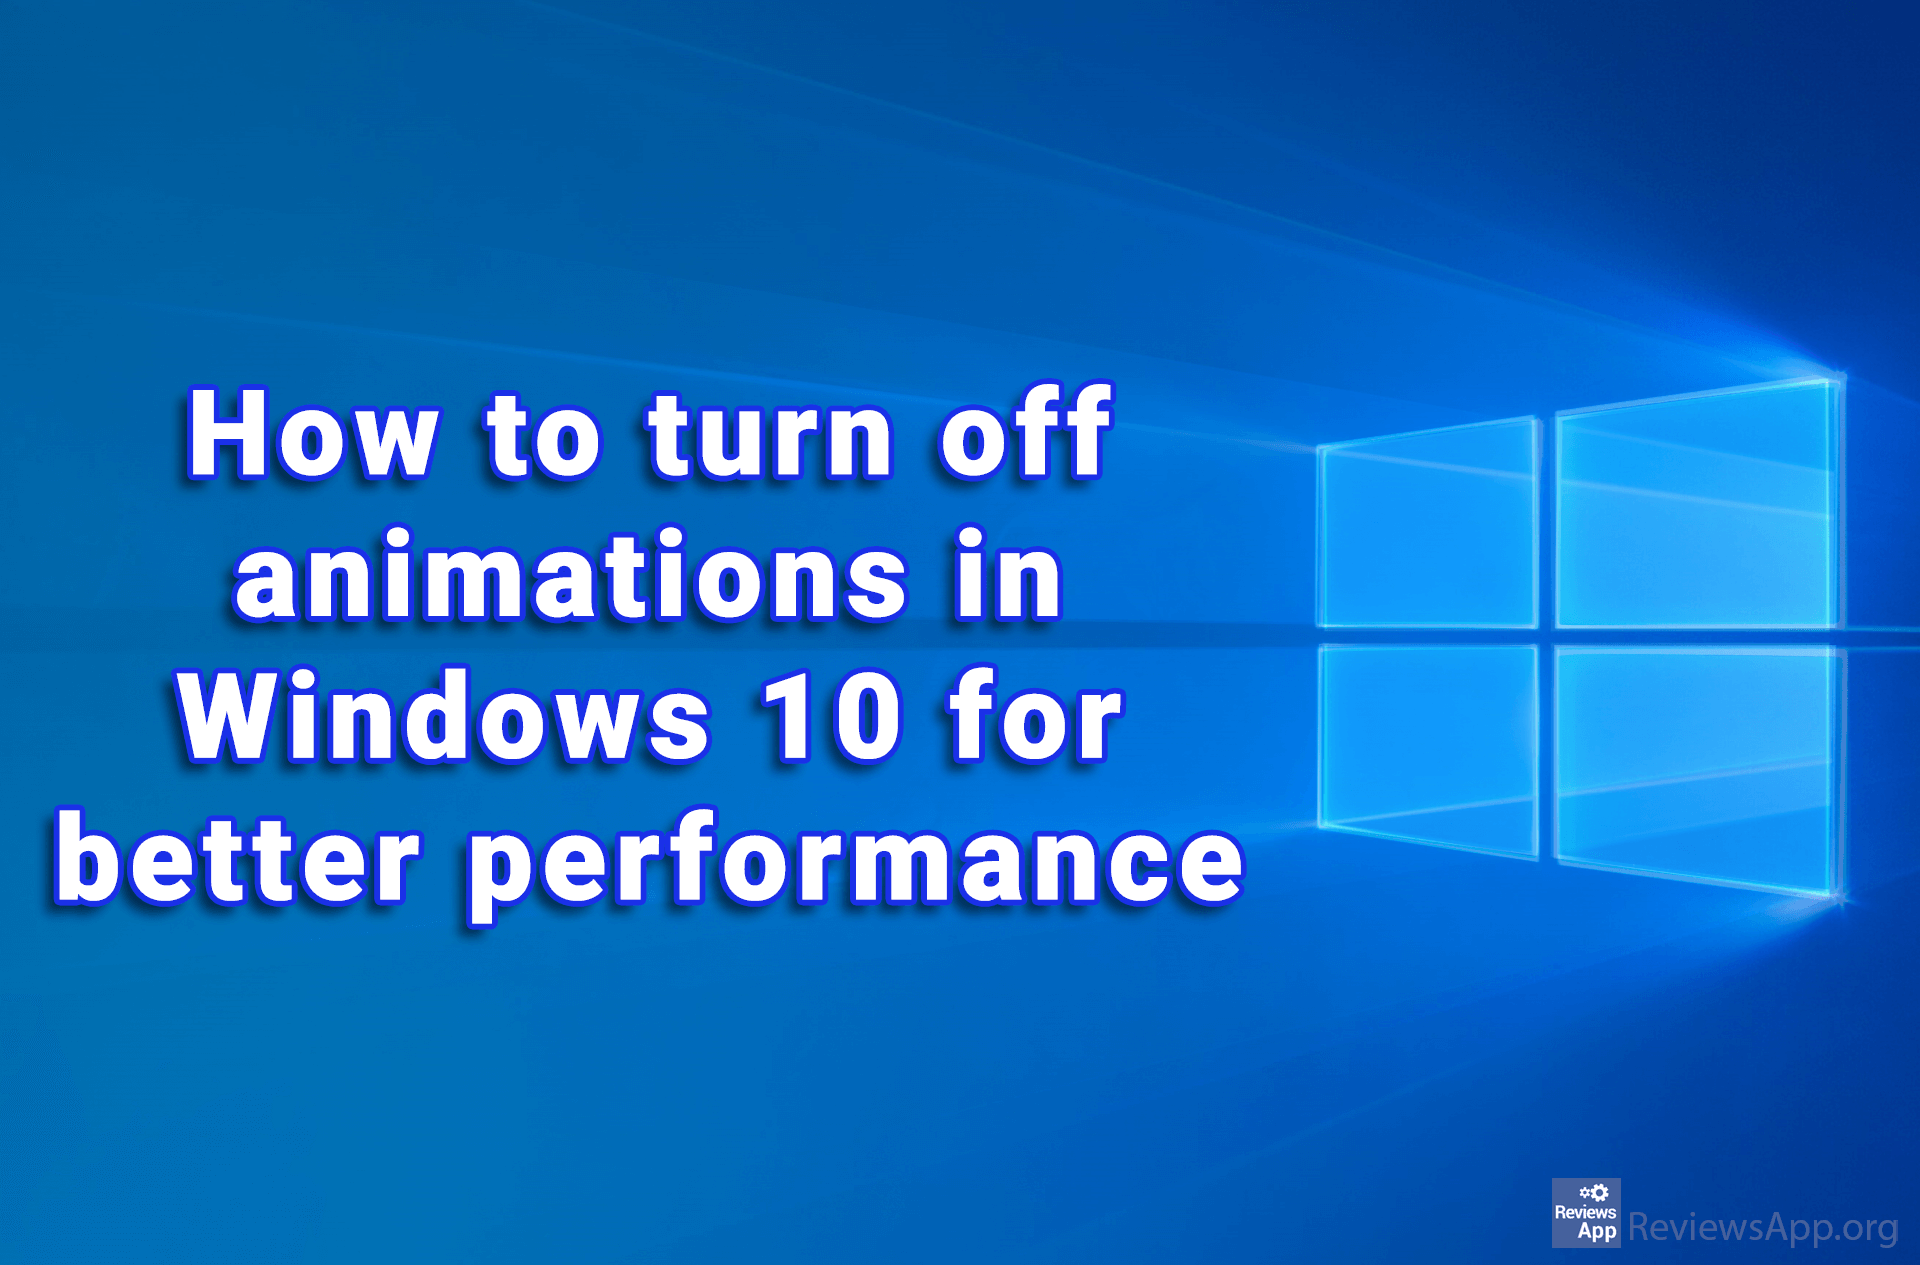 How to turn off animations in Windows 10 for better performance